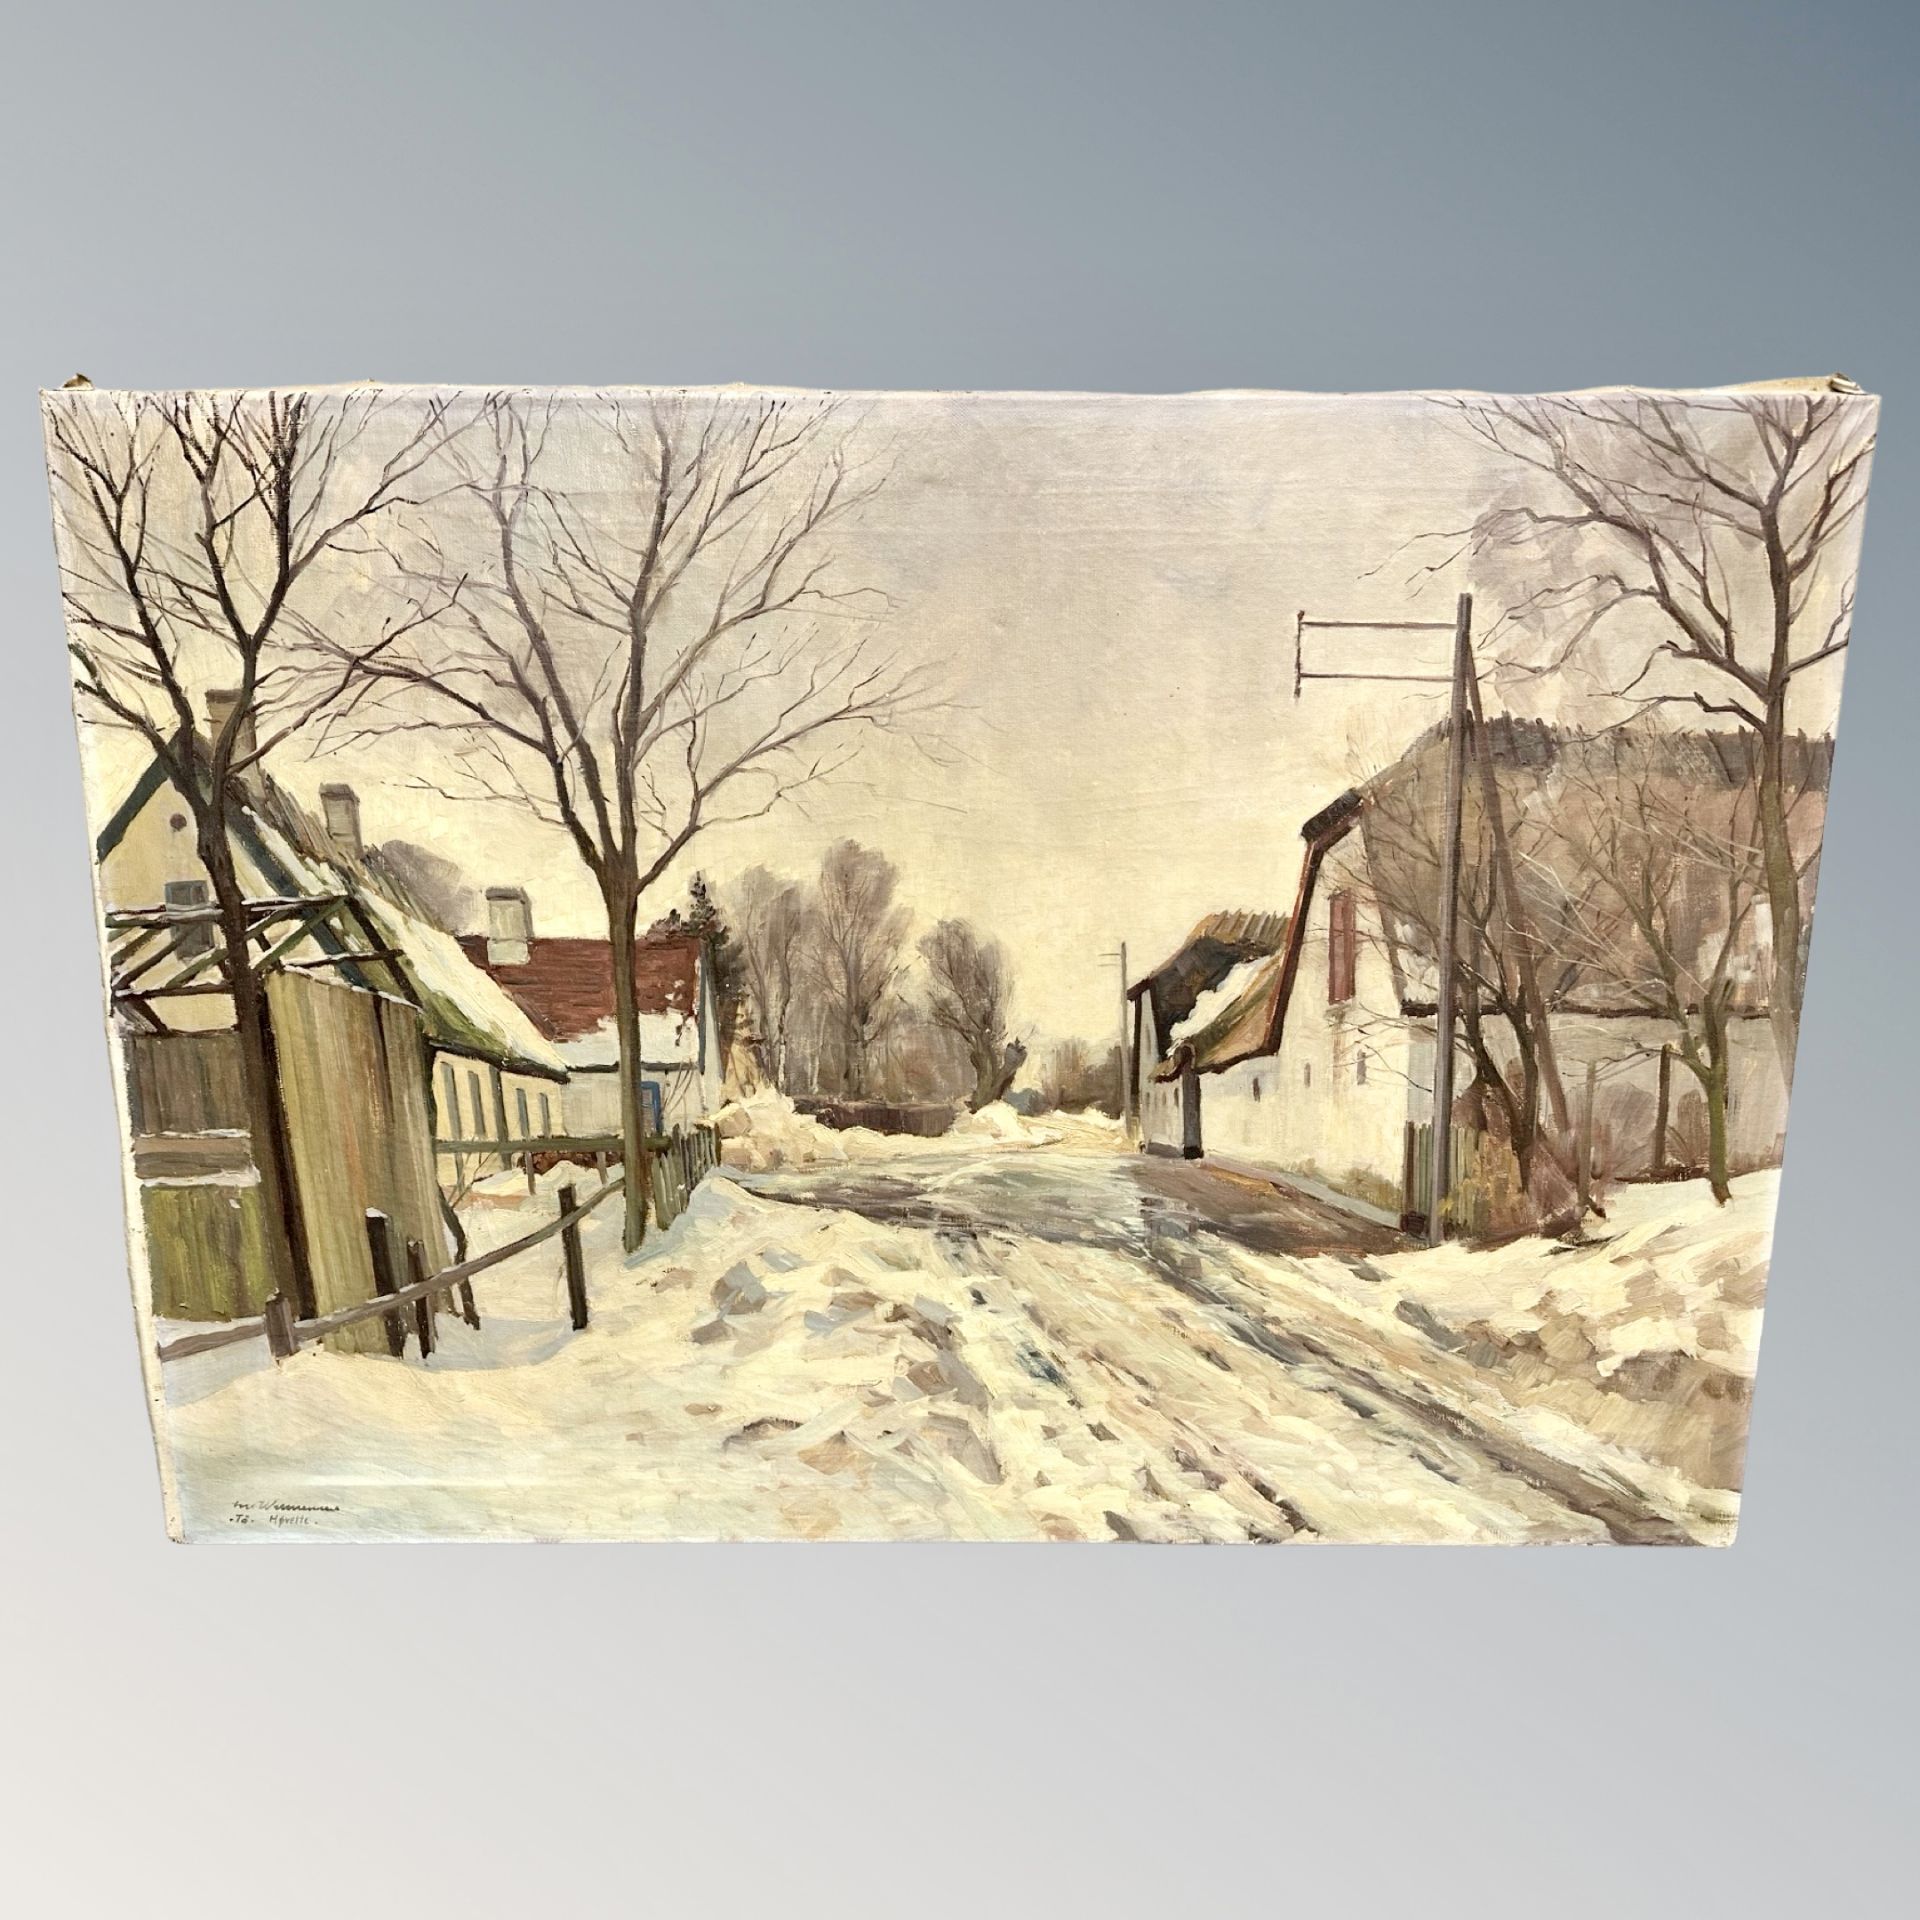 T Hovelte : Snow in a street, oil on canvas,